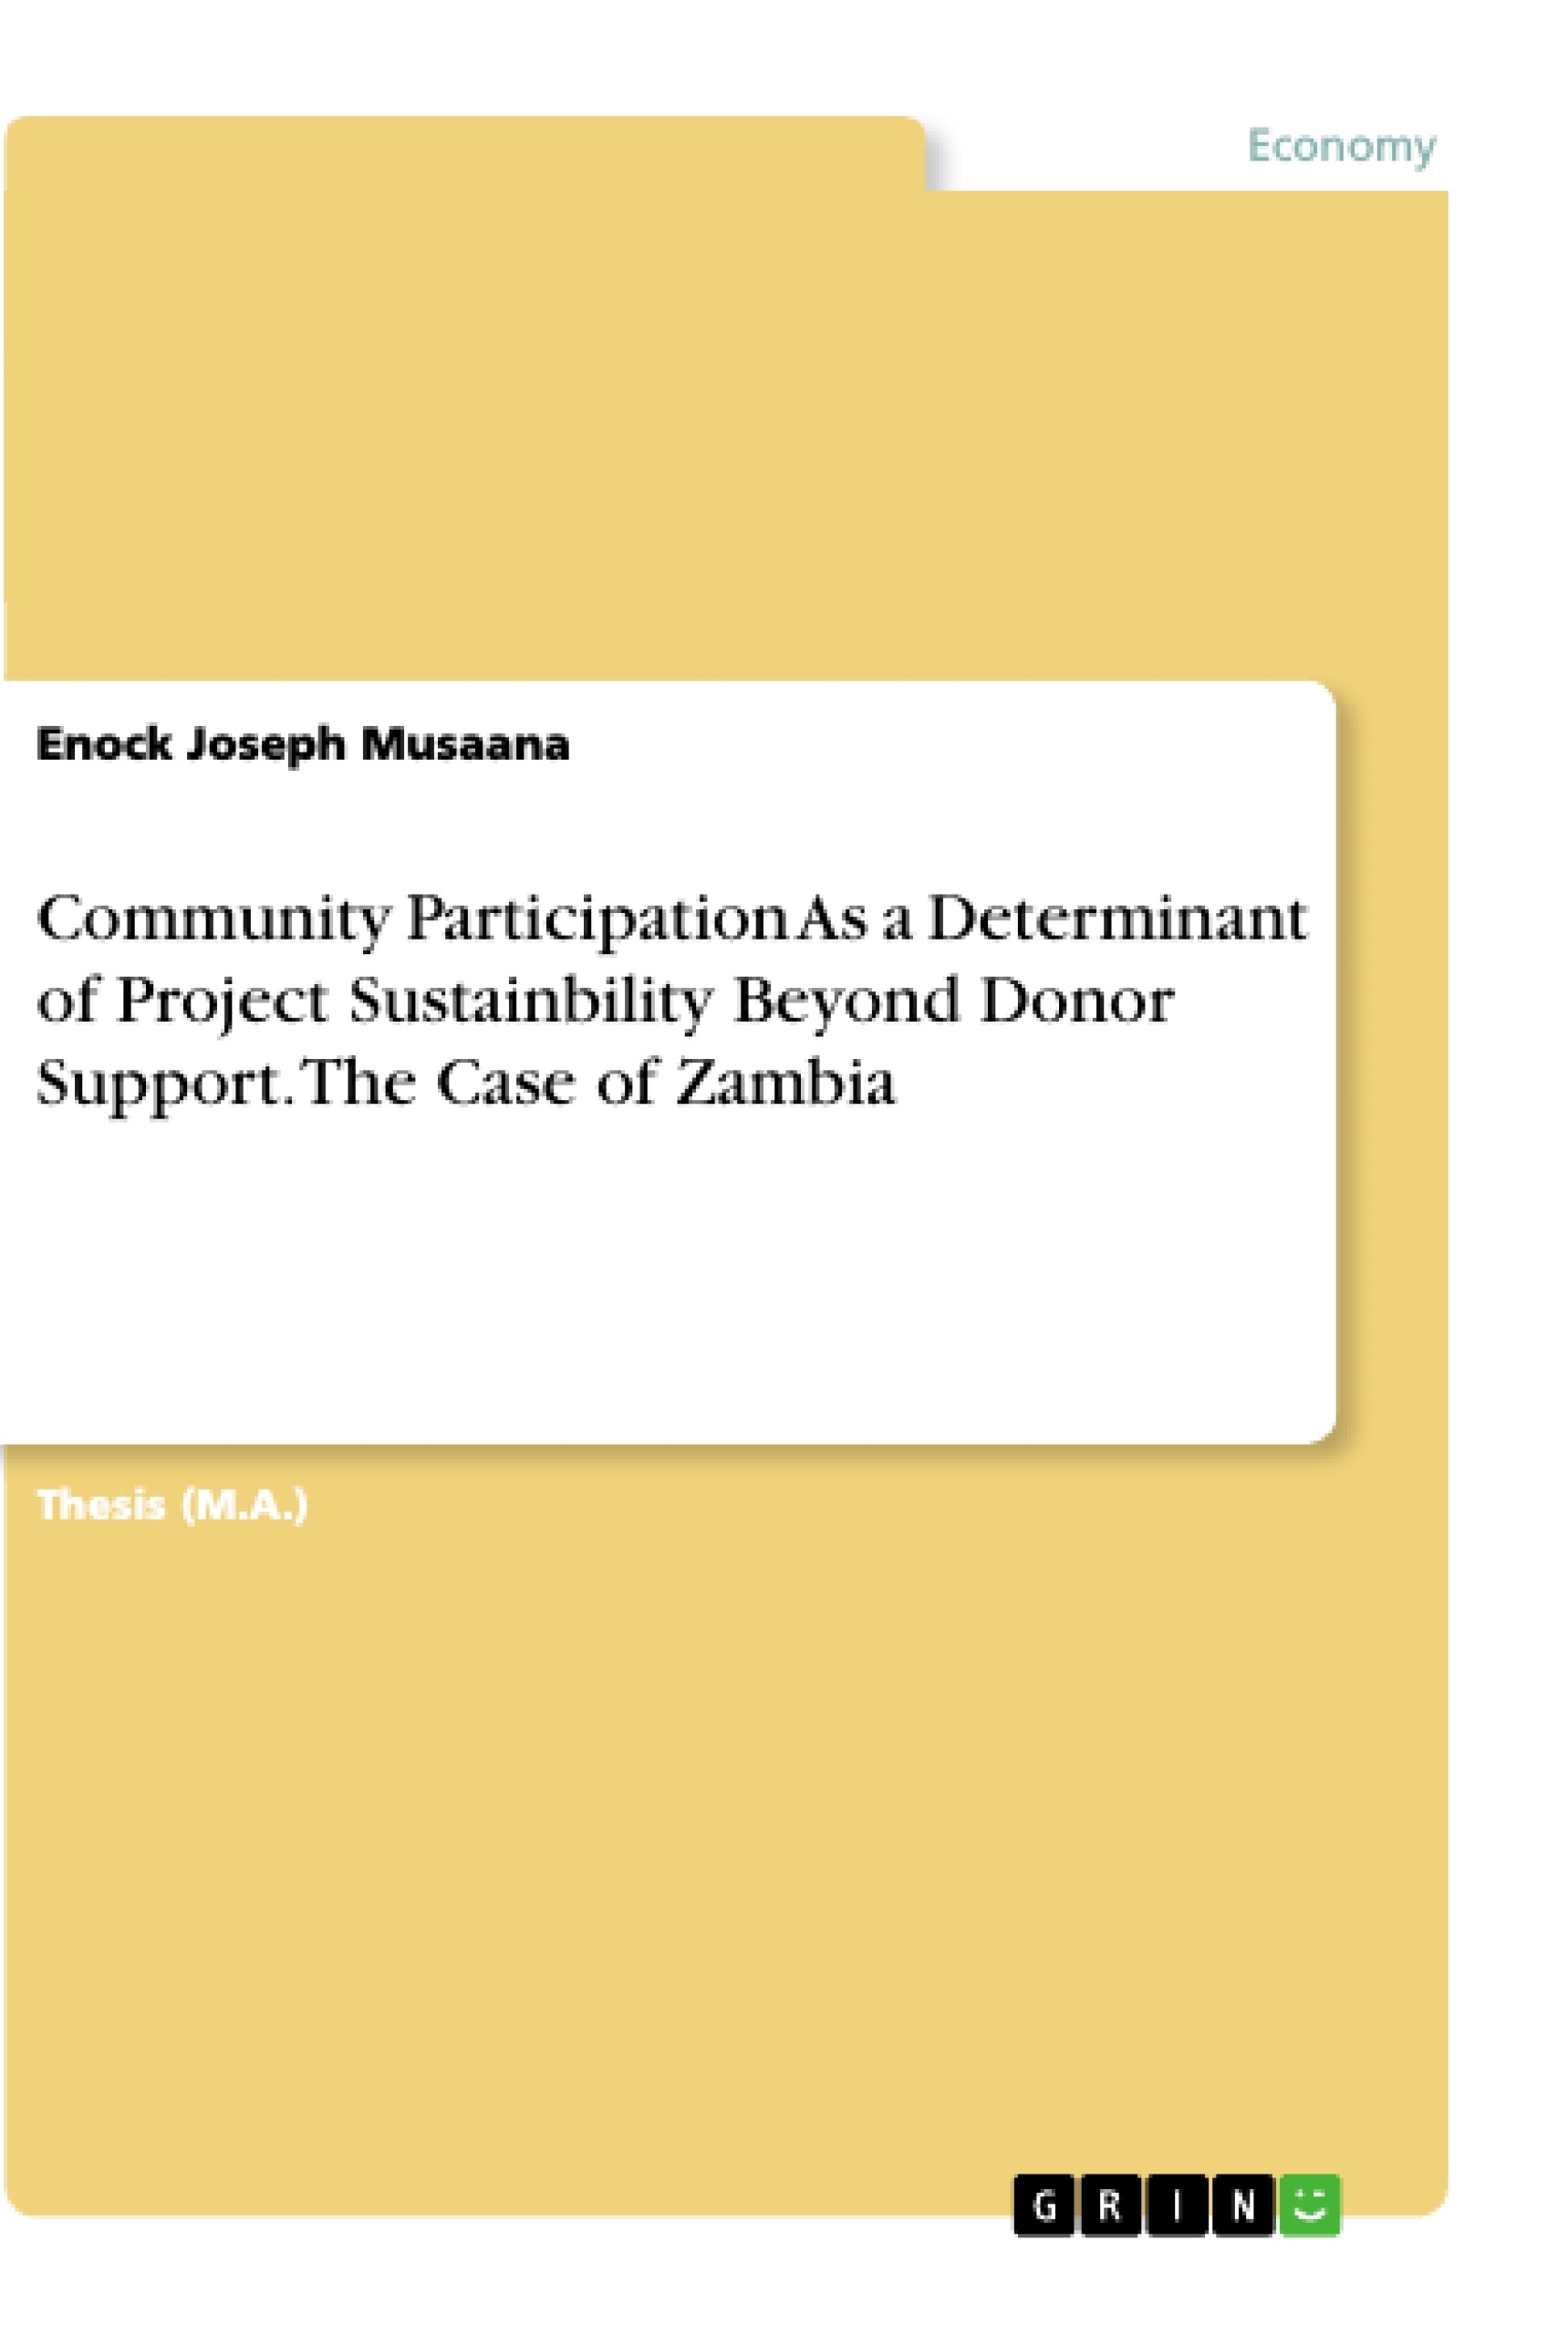 Title: Community Participation As a Determinant of Project Sustainbility Beyond Donor Support. The Case of Zambia